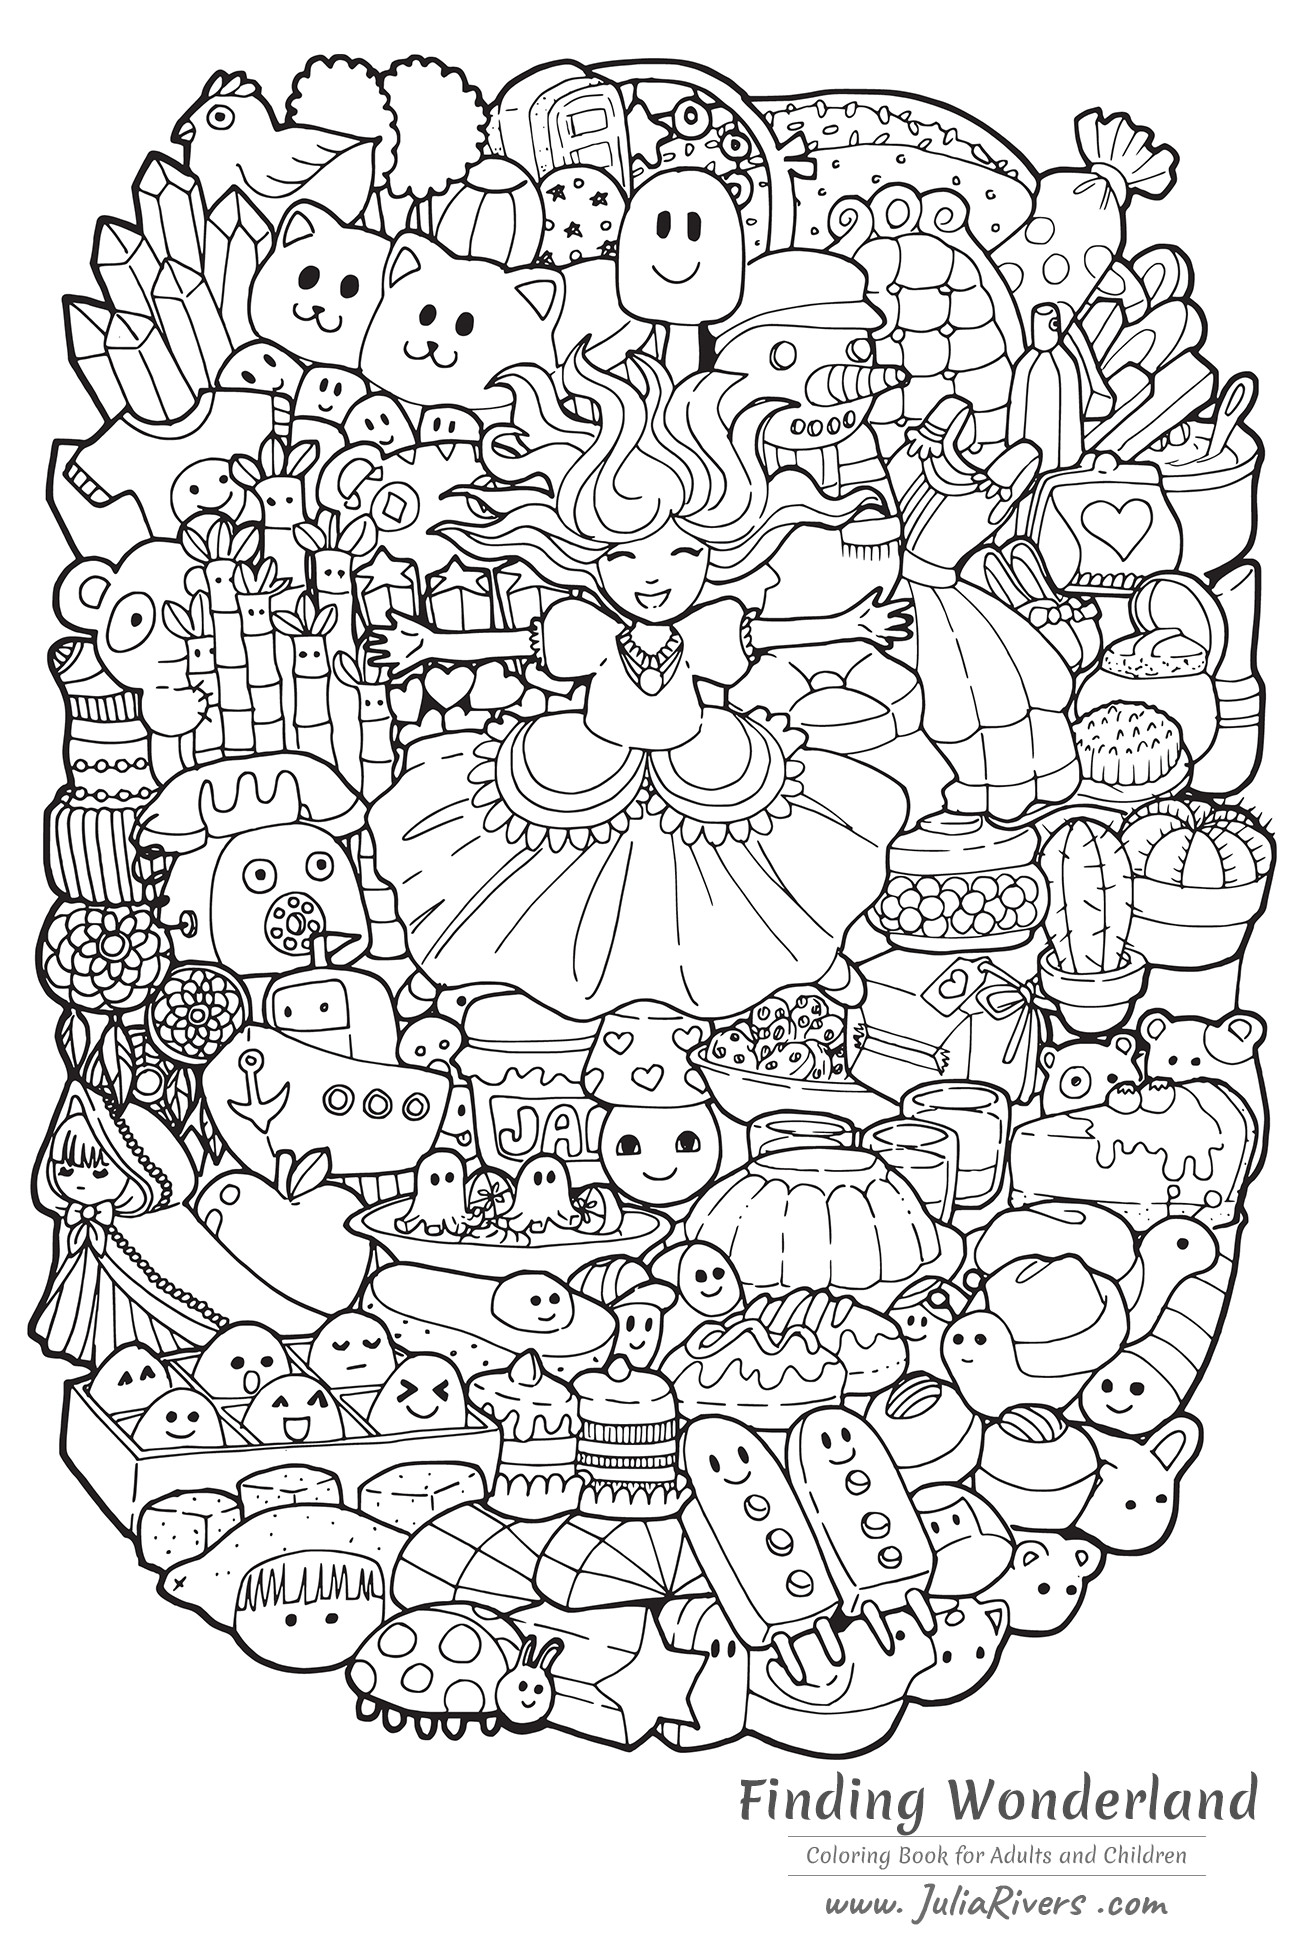 'Finding Wonderland' : Gorgeous coloring pages with a happy Princess and various Doodle characters (Kawaii style), Artist : Julia Rivers